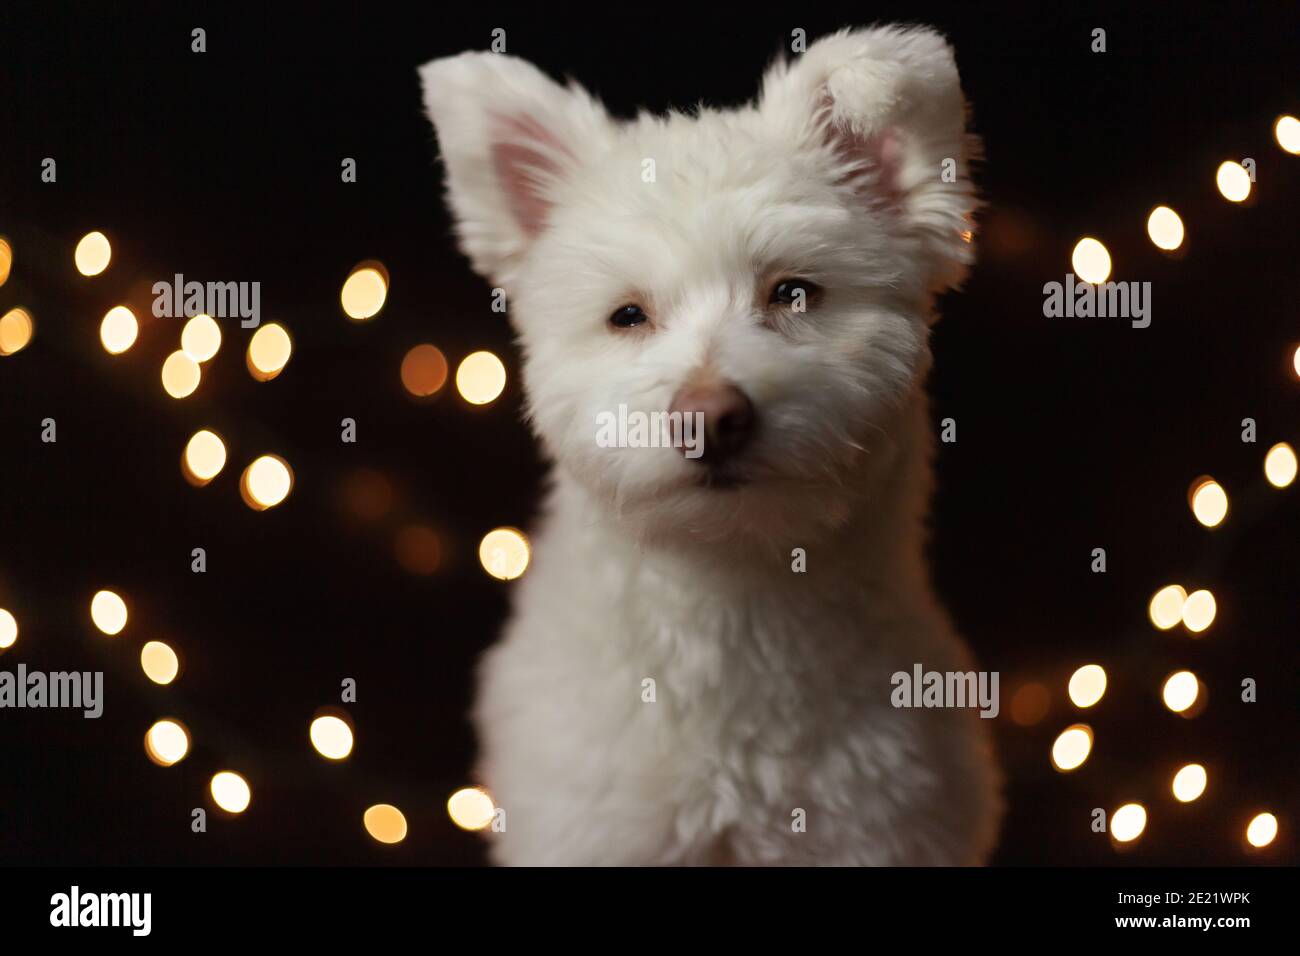 A White Fluffy Grumpy Looking Mixed Breed Dog On A Black Background With Lights Behind Him The Dog Is Mainly Chihuahua Japanese Spitz And Standar Stock Photo Alamy